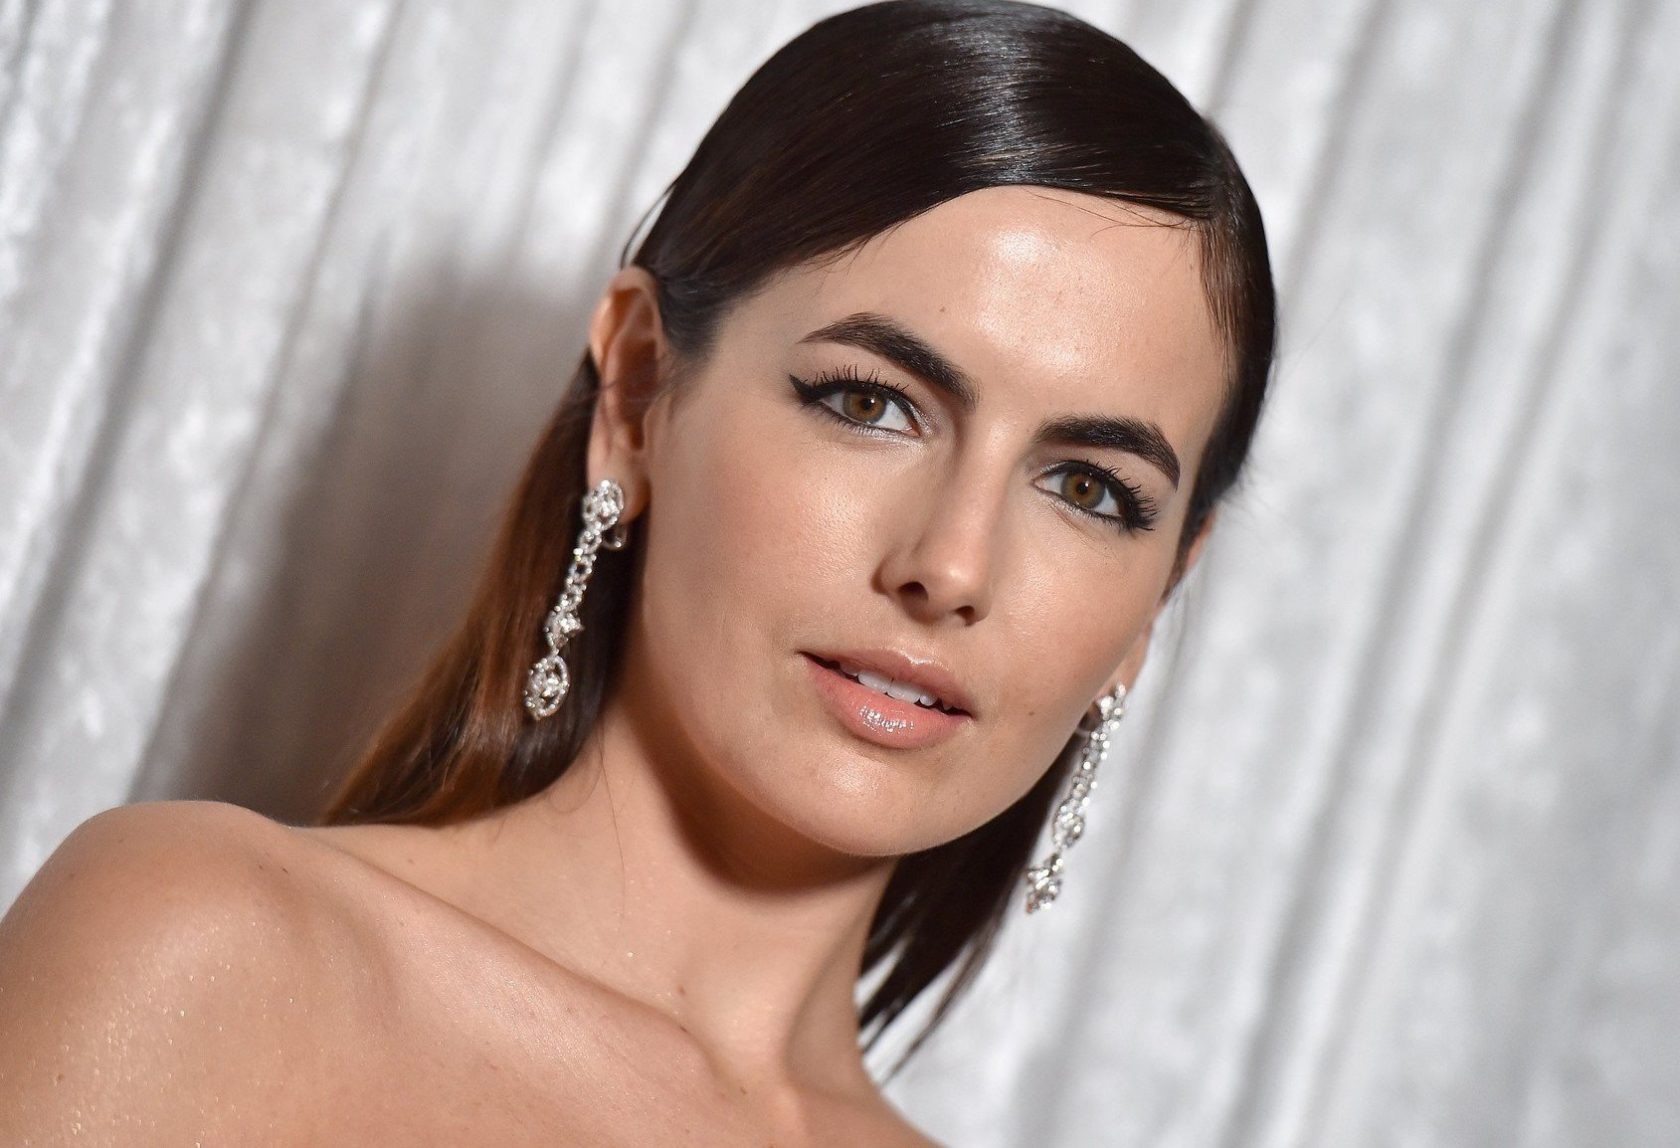 Inaugural Fundraising Gala for The Fred Hollows Foundation. The Dream Hotel, Hollywood, California. 15 Nov 2017 Pictured: Camilla Belle., Image: 355500744, License: Rights-managed, Restrictions: World Rights, Model Release: no, Credit line: Profimedia, Mega Agency